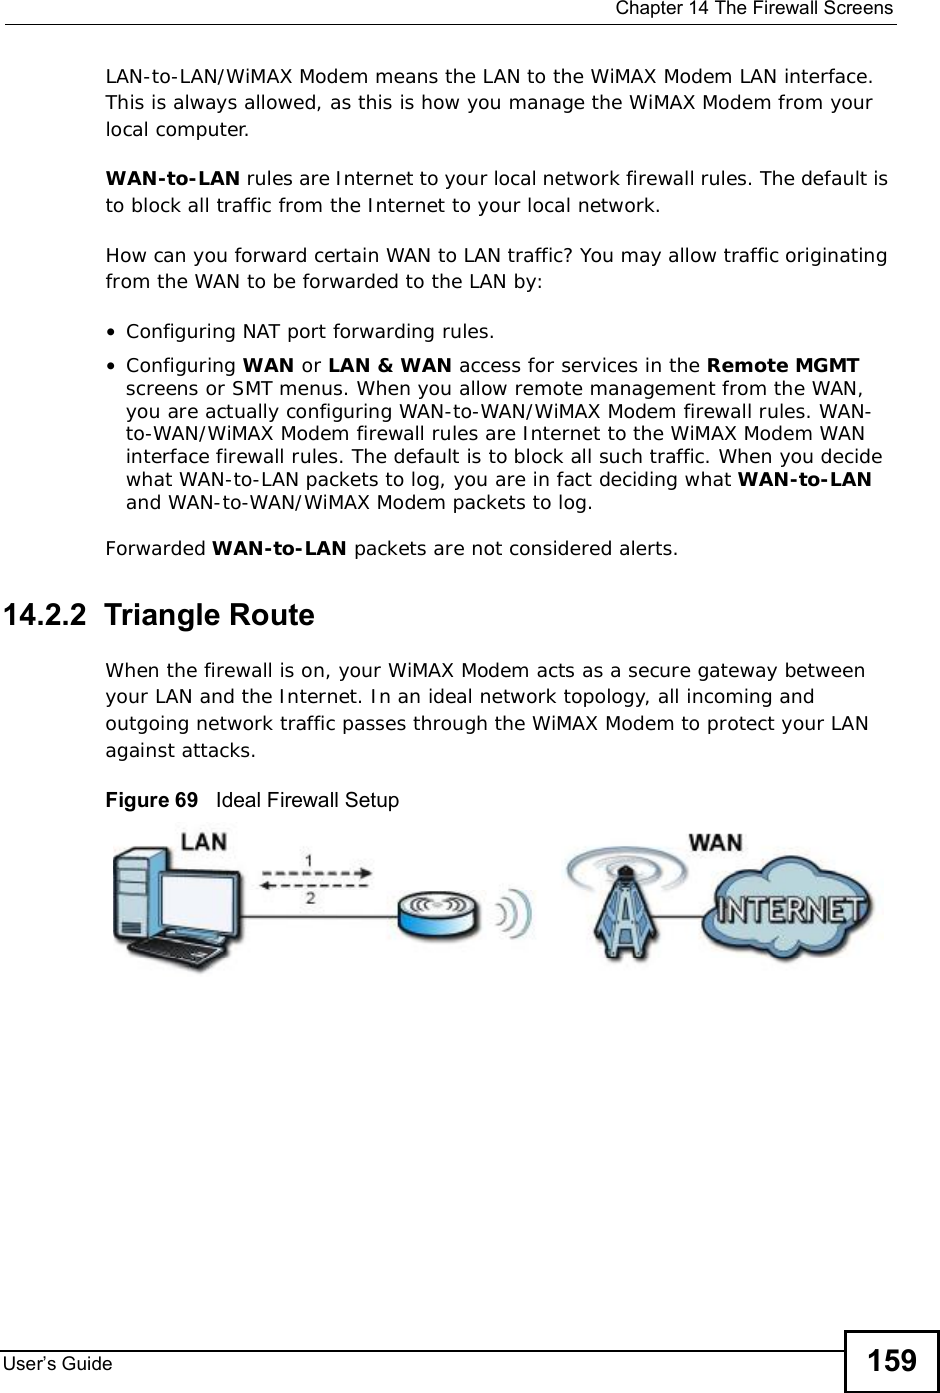  Chapter 14The Firewall ScreensUser s Guide 159LAN-to-LAN/WiMAX Modem means the LAN to the WiMAX Modem LAN interface. This is always allowed, as this is how you manage the WiMAX Modem from your local computer.WAN-to-LAN rules are Internet to your local network firewall rules. The default is to block all traffic from the Internet to your local network. How can you forward certain WAN to LAN traffic? You may allow traffic originating from the WAN to be forwarded to the LAN by:•Configuring NAT port forwarding rules.•Configuring WAN or LAN &amp; WAN access for services in the Remote MGMTscreens or SMT menus. When you allow remote management from the WAN, you are actually configuring WAN-to-WAN/WiMAX Modem firewall rules. WAN-to-WAN/WiMAX Modem firewall rules are Internet to the WiMAX Modem WAN interface firewall rules. The default is to block all such traffic. When you decide what WAN-to-LAN packets to log, you are in fact deciding what WAN-to-LANand WAN-to-WAN/WiMAX Modem packets to log. Forwarded WAN-to-LAN packets are not considered alerts.14.2.2  Triangle RouteWhen the firewall is on, your WiMAX Modem acts as a secure gateway between your LAN and the Internet. In an ideal network topology, all incoming and outgoing network traffic passes through the WiMAX Modem to protect your LAN against attacks.Figure 69   Ideal Firewall Setup